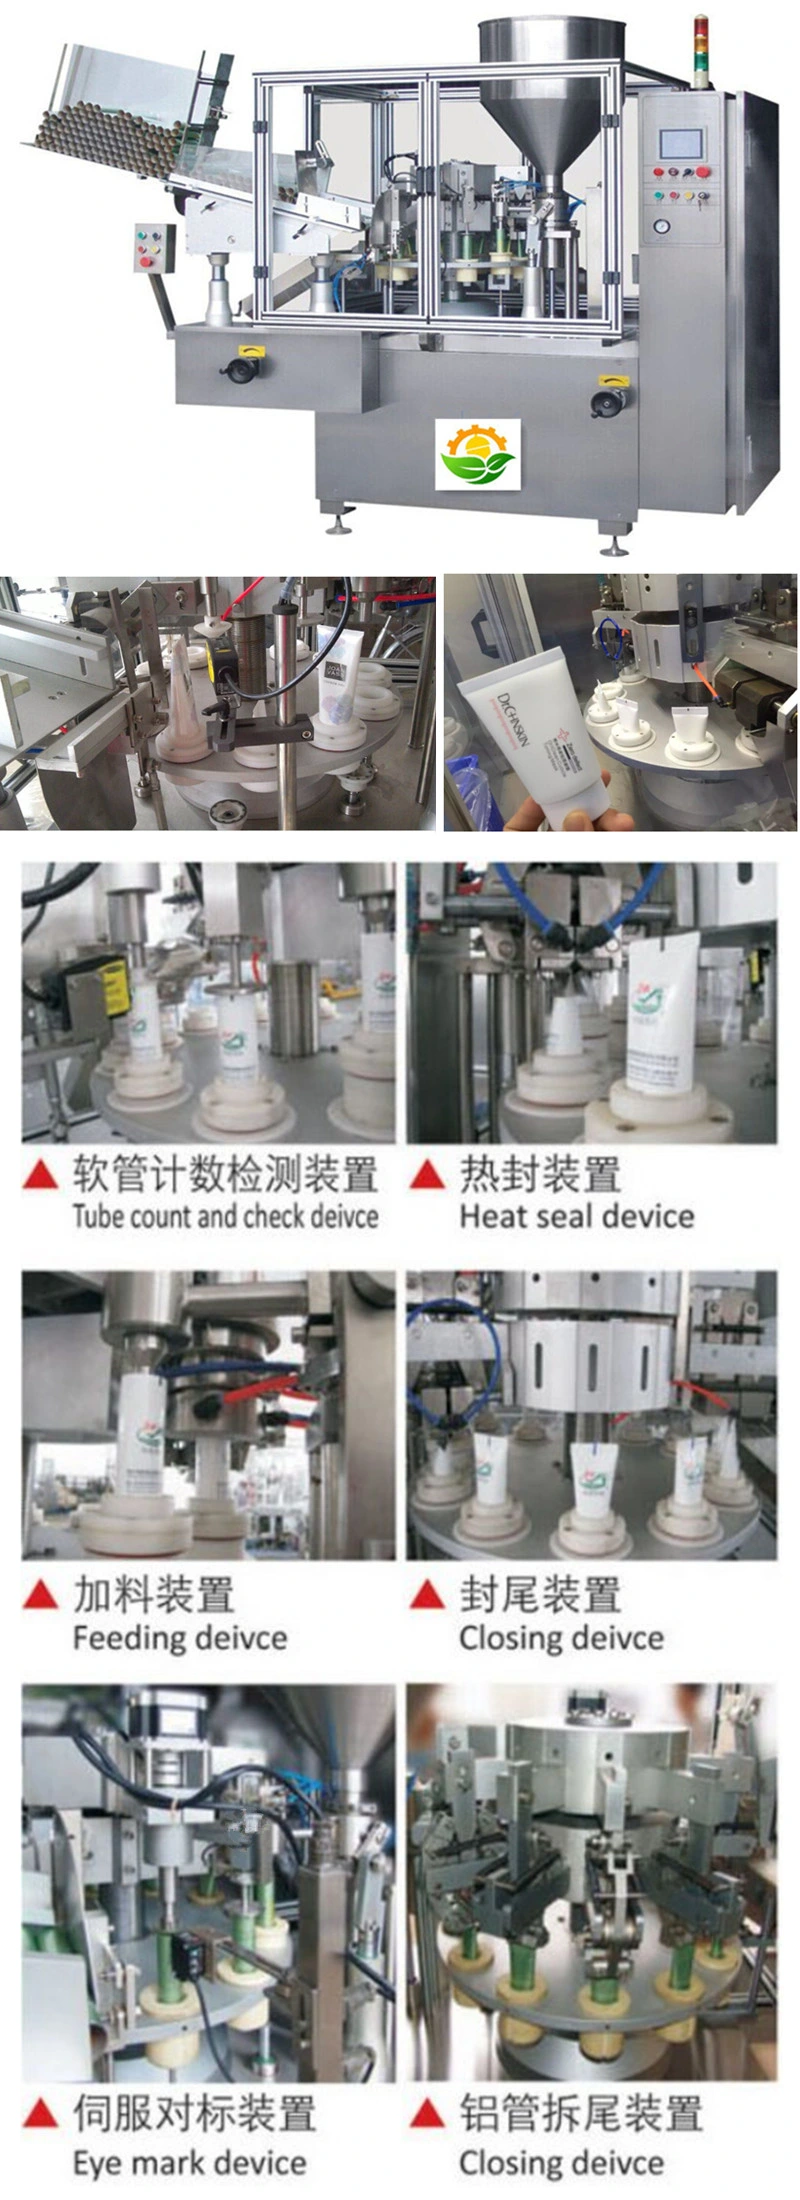 Toothpaste Tube Filling Machine Ultrasound Machines Toothpaste Machine with New Technology